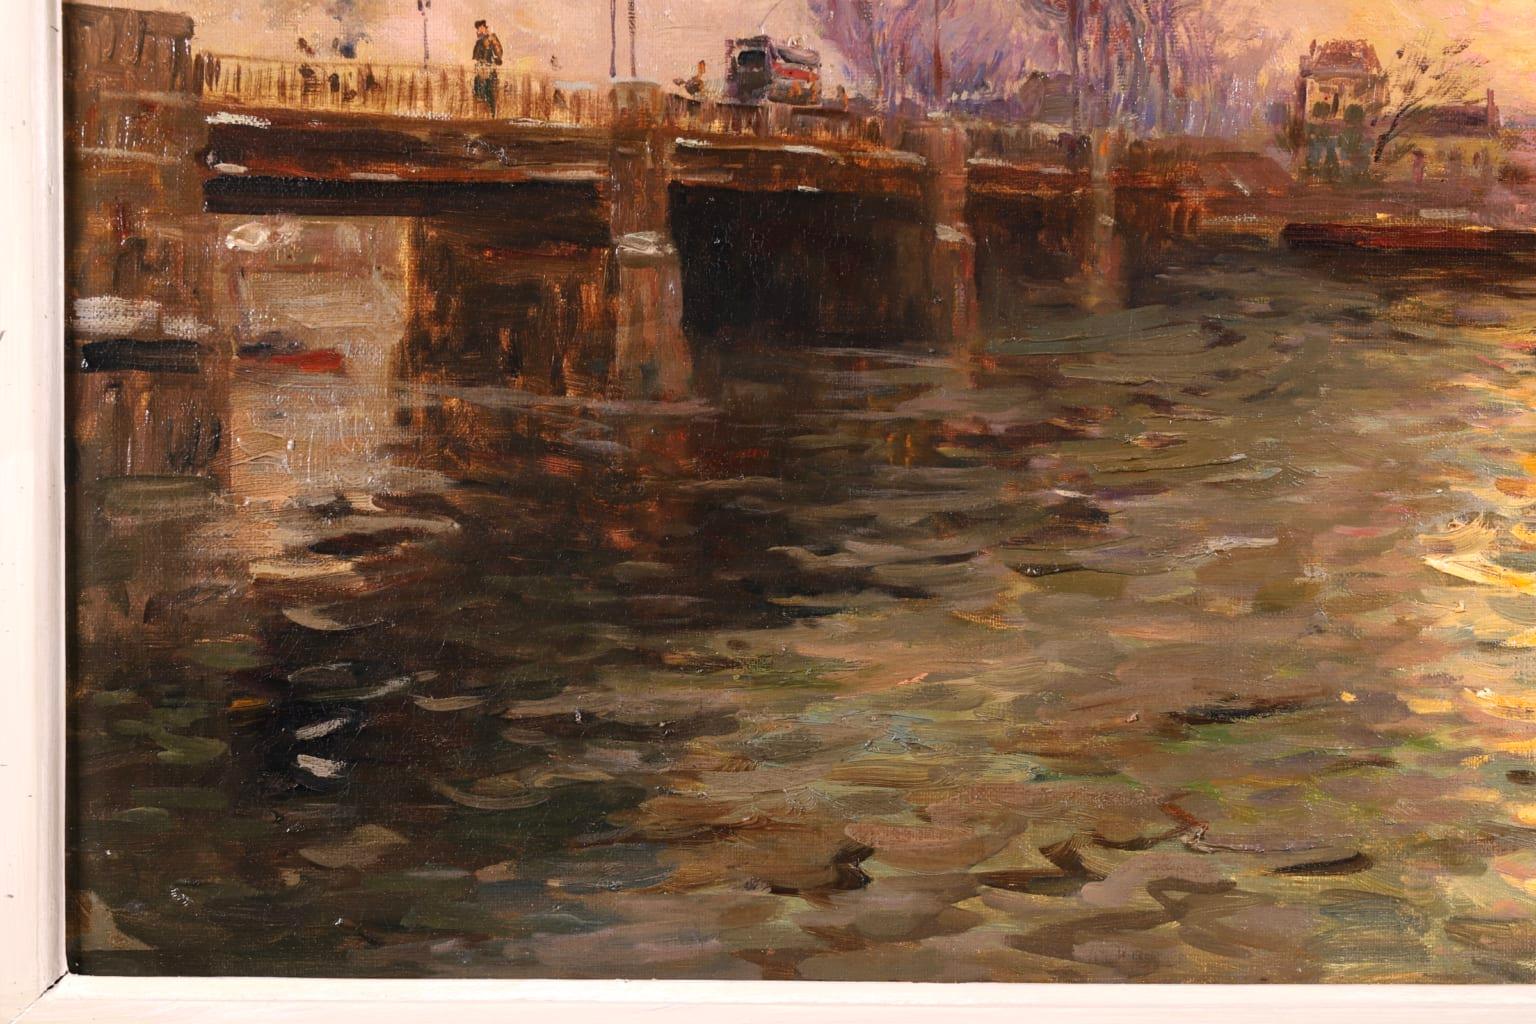 Sunset on the River Seine - Impressionist Oil, Riverscape by Elie Anatole Pavil 1